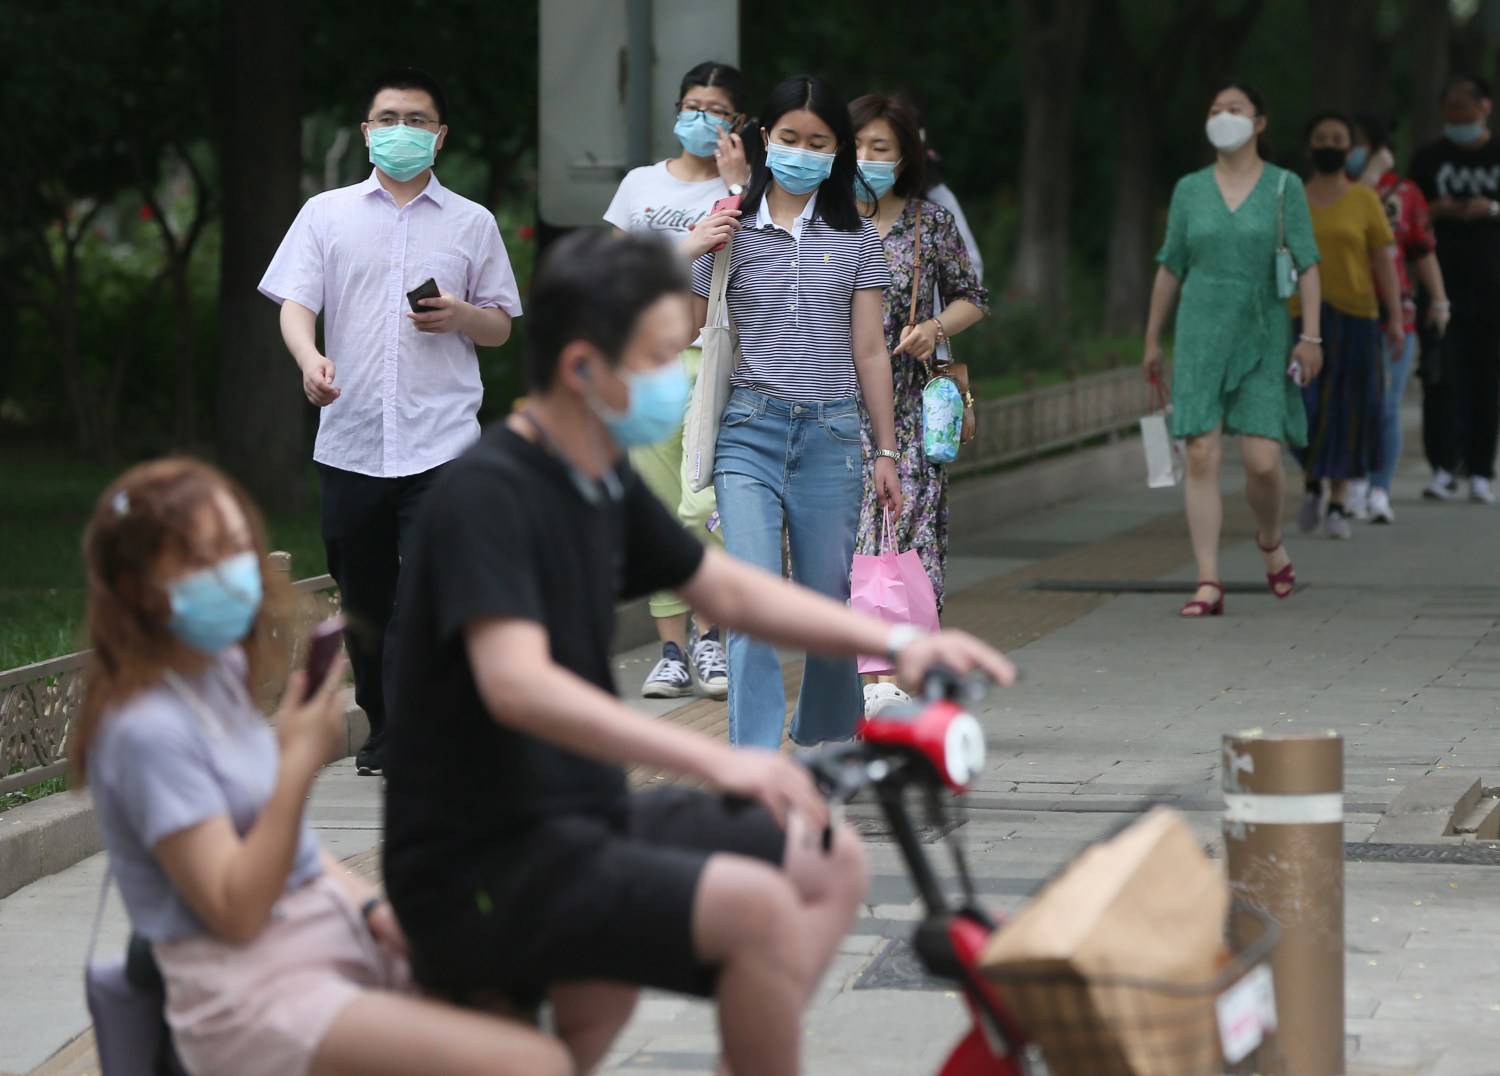 People wearing face mask are seen during commuting time in Beijing, China on June 29, 2020, amid continuing worries over the novel coronavirus COVID-19.   ( The Yomiuri Shimbun )